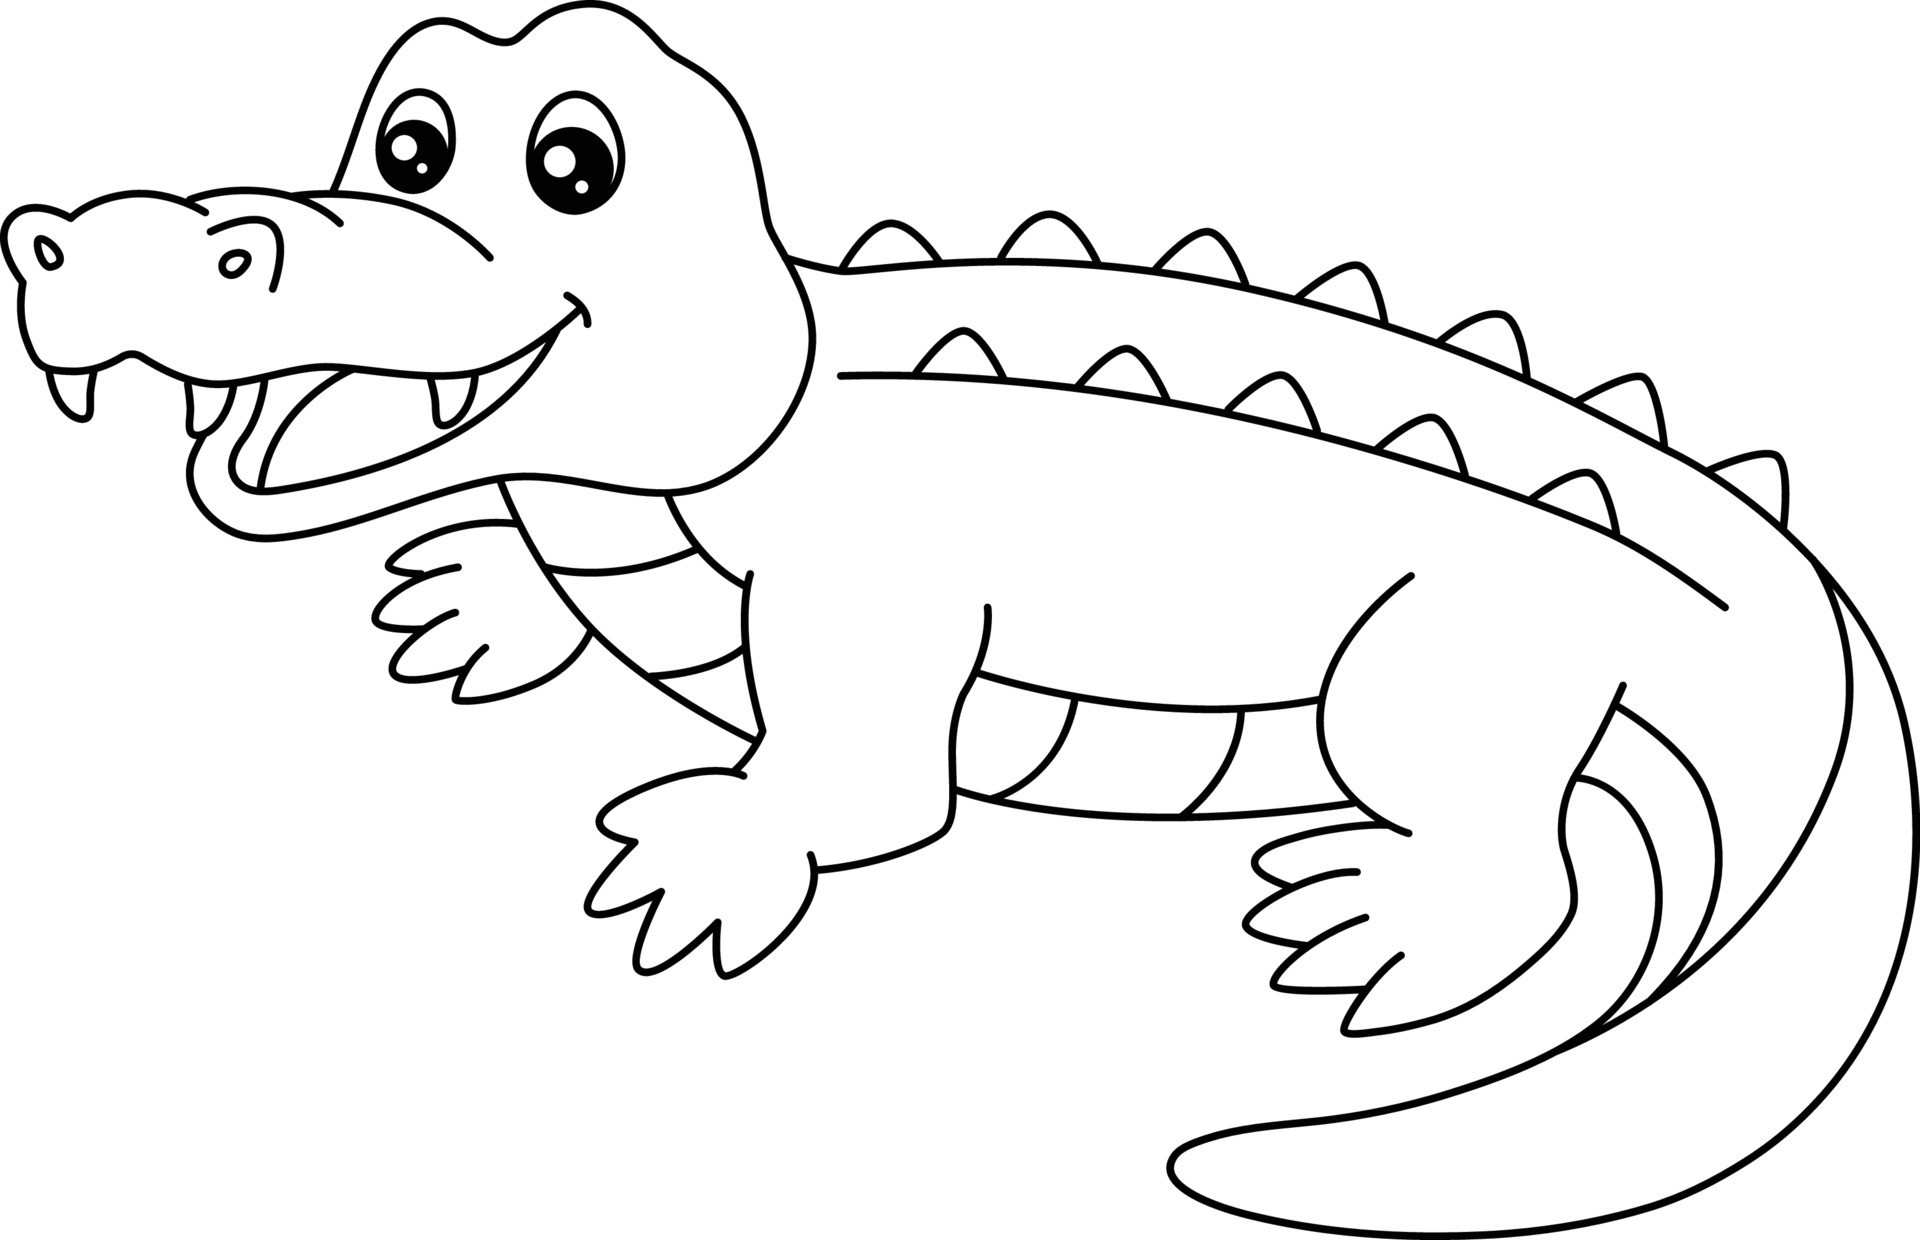 Alligator Coloring Vector Art, Icons, and Graphics for Free Download